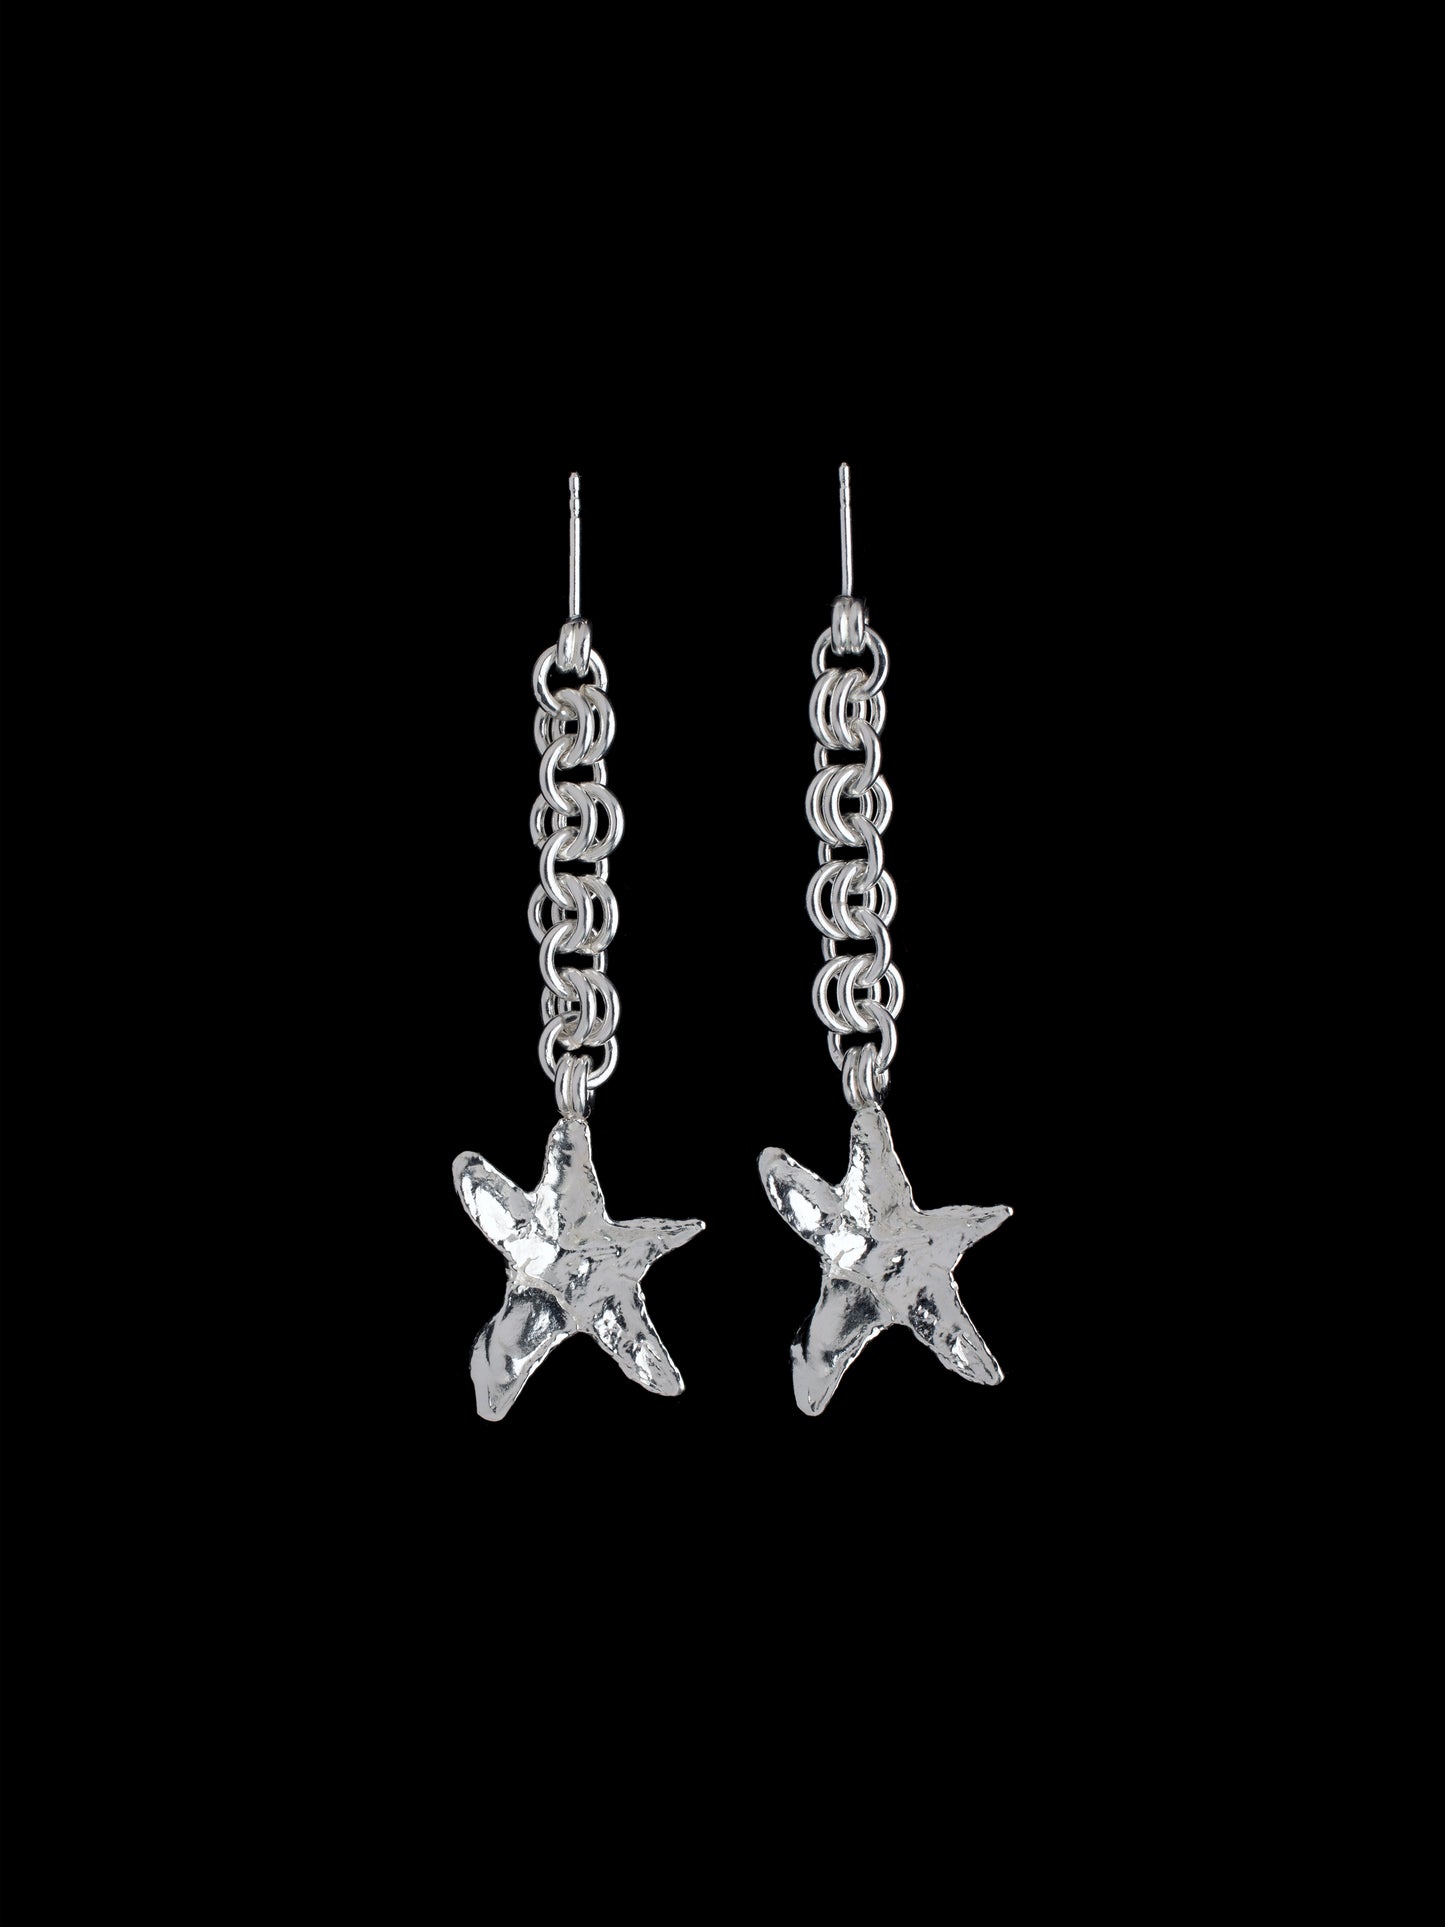 Chain earrings with organic star shaped pendant handmade in silver